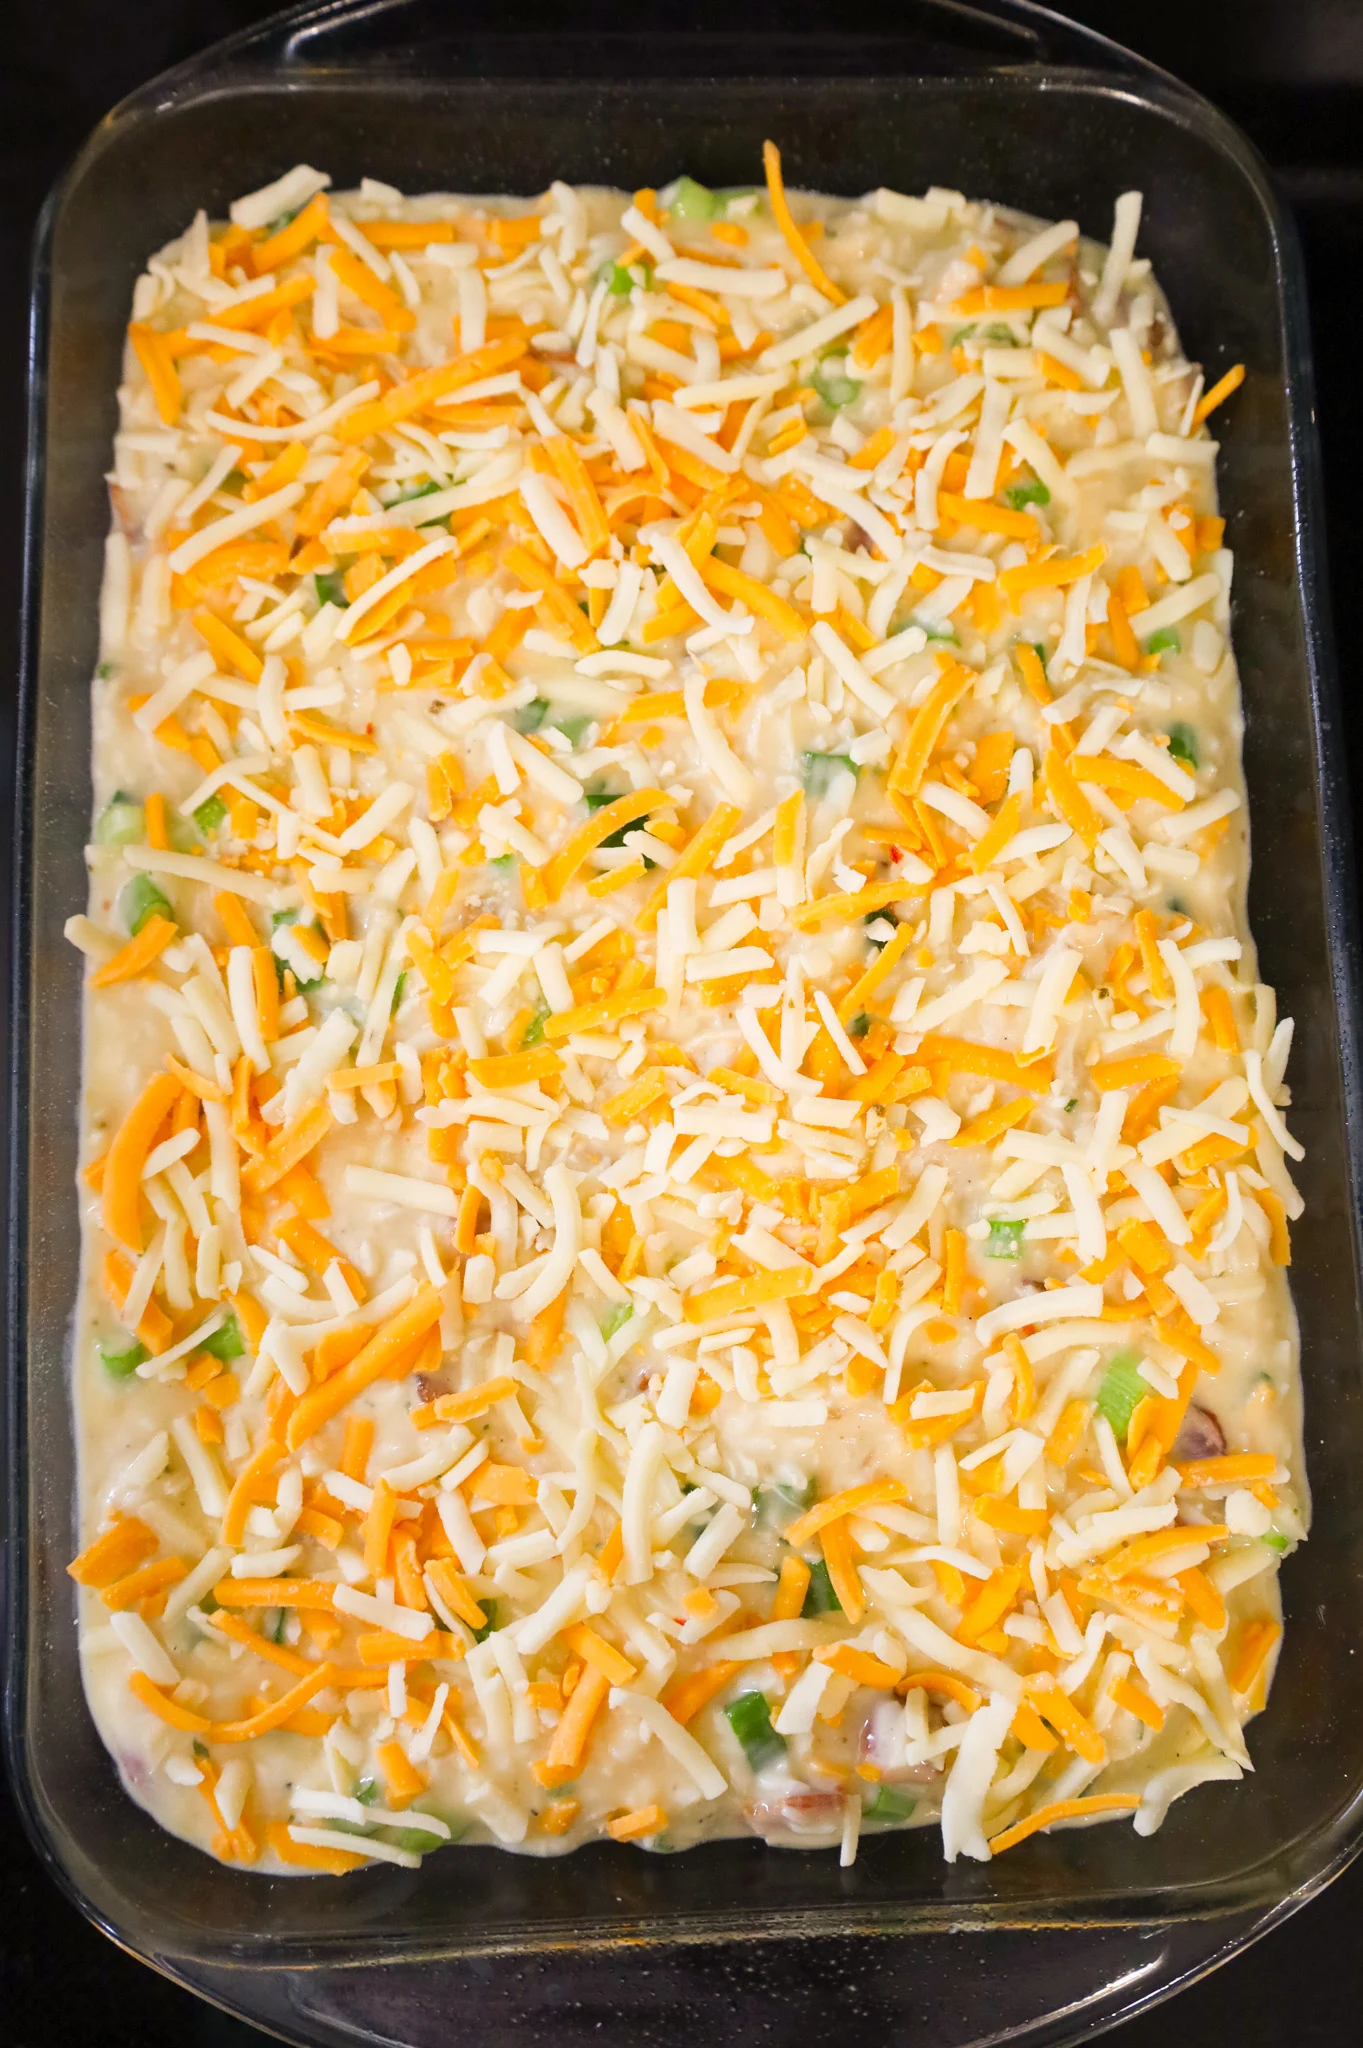 shredded cheese on top of chicken bacon ranch rice mixture in a baking dish